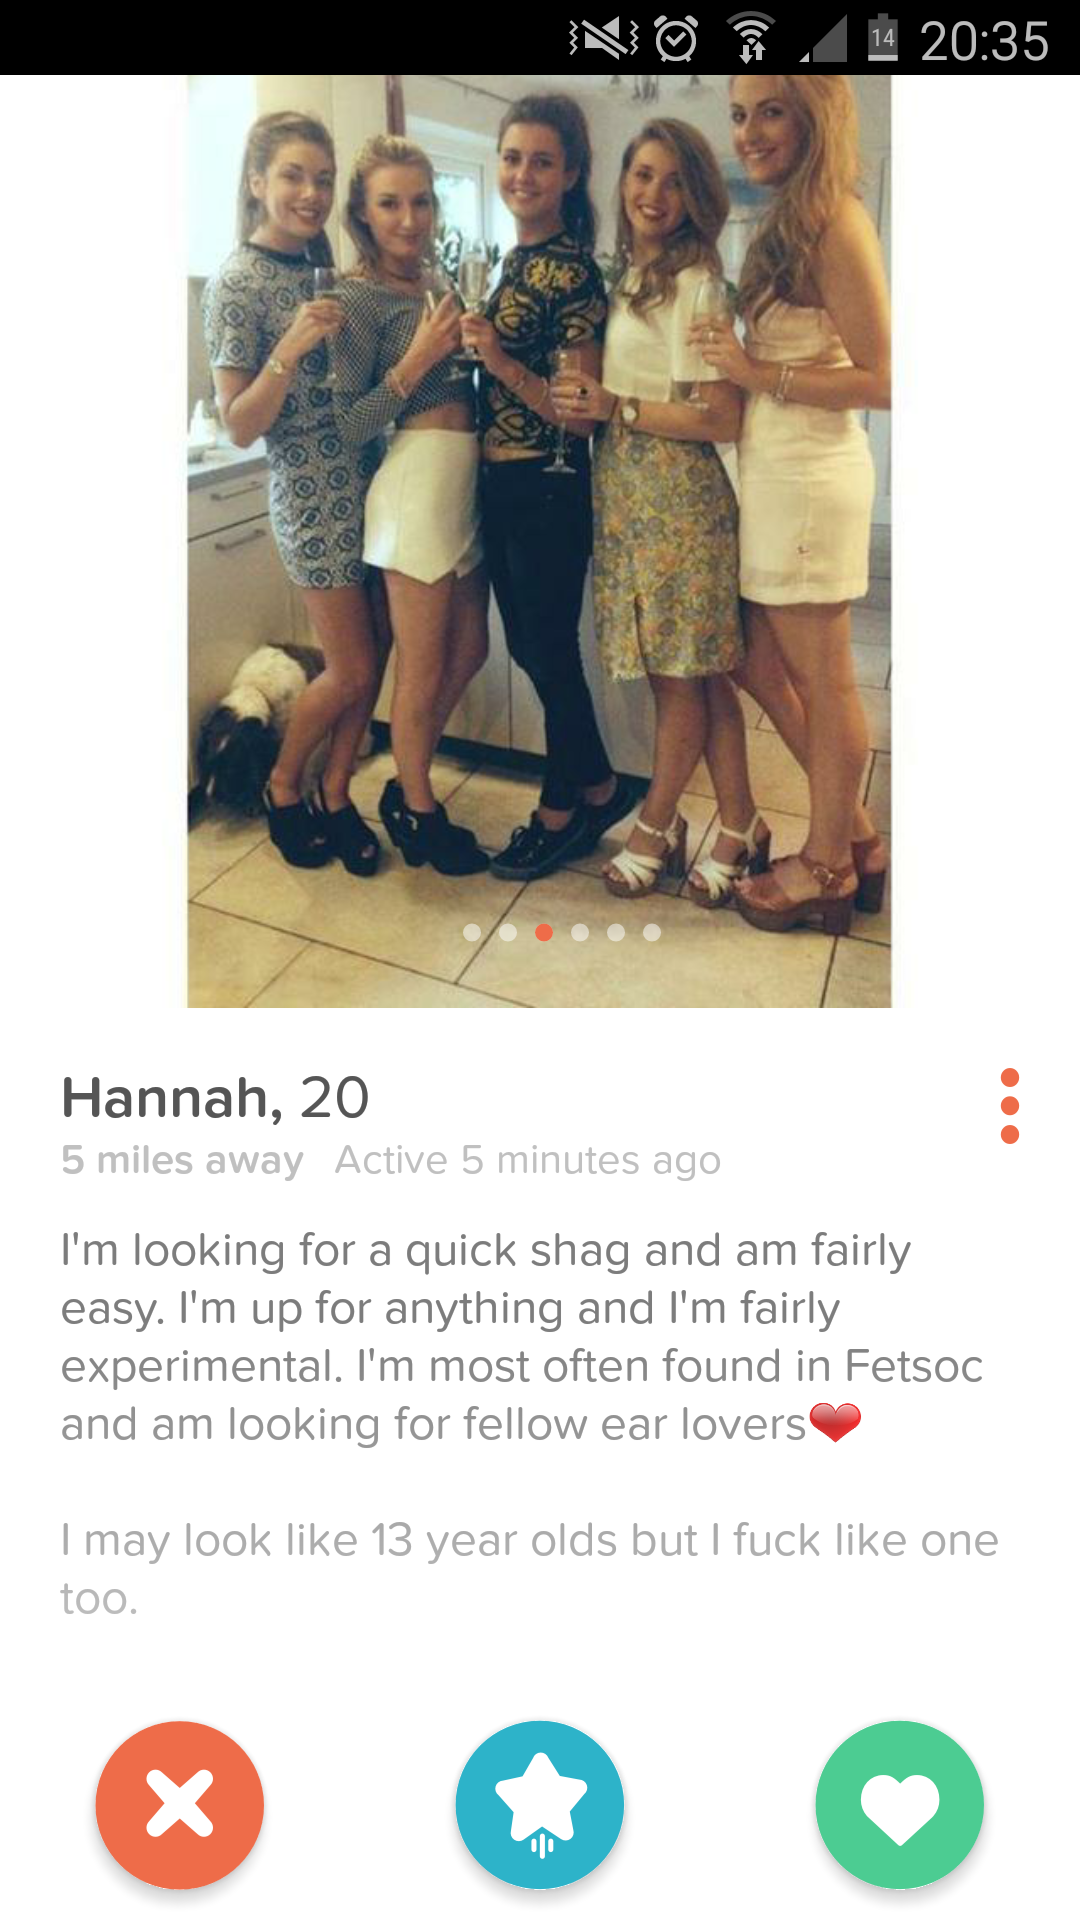 tinder - shoulder - No. Hannah, 20 5 miles away Active 5 minutes ago I'm looking for a quick shag and am fairly easy. I'm up for anything and I'm fairly experimental, I'm most often found in Fetsoc and am looking for fellow ear lovers I may look 13 year o